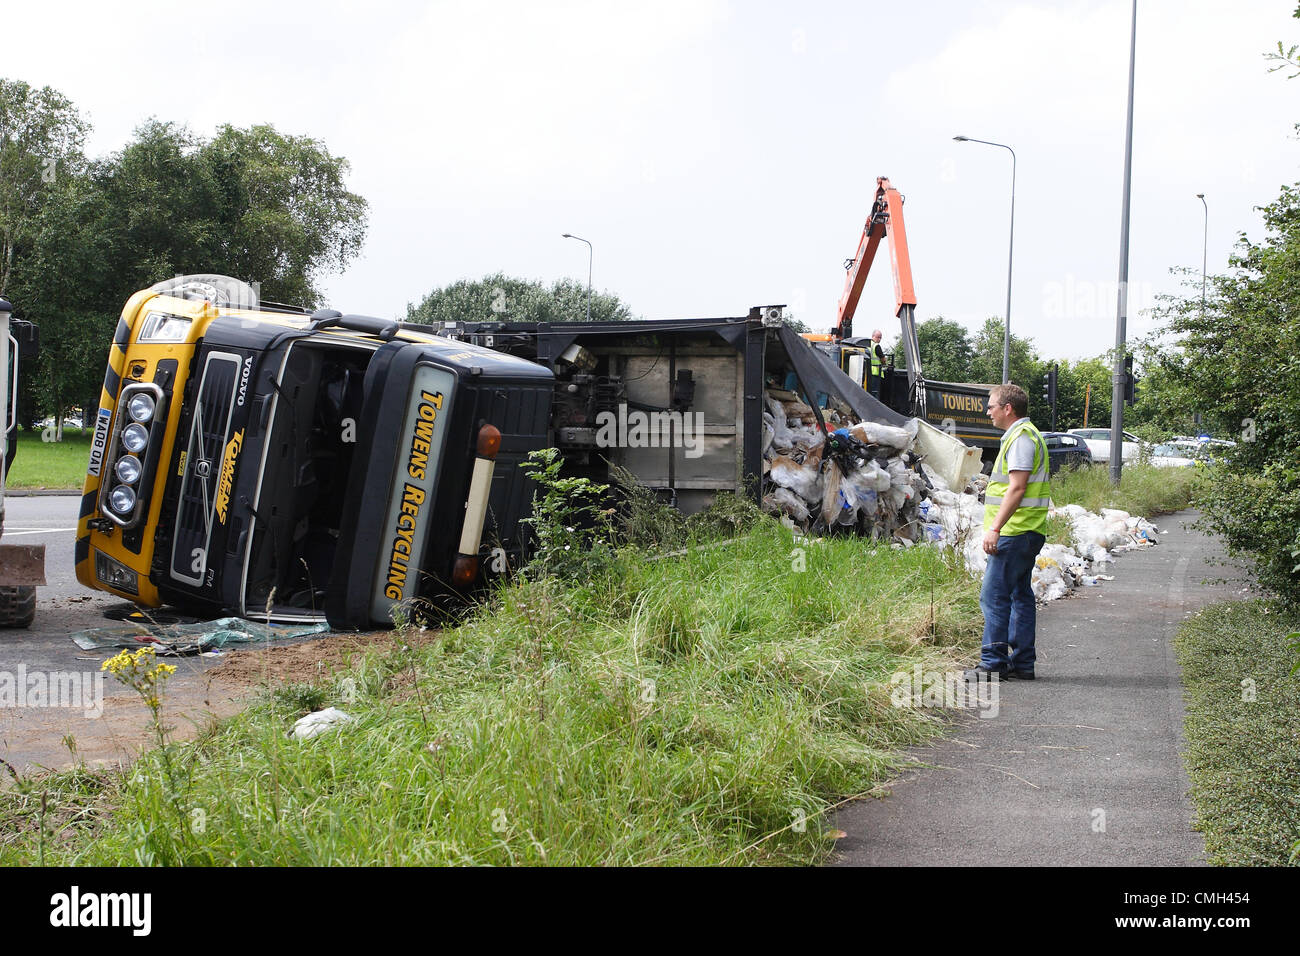 9th Aug 2012. A heavy truck owned by the Weston super Mare based Towens Recycling turned over while travelling on A4174 round the Wick roundabout near the Willy Wicket pub. It was carrying waste for recycling. Credit:  Timothy Large / Alamy Live News Stock Photo